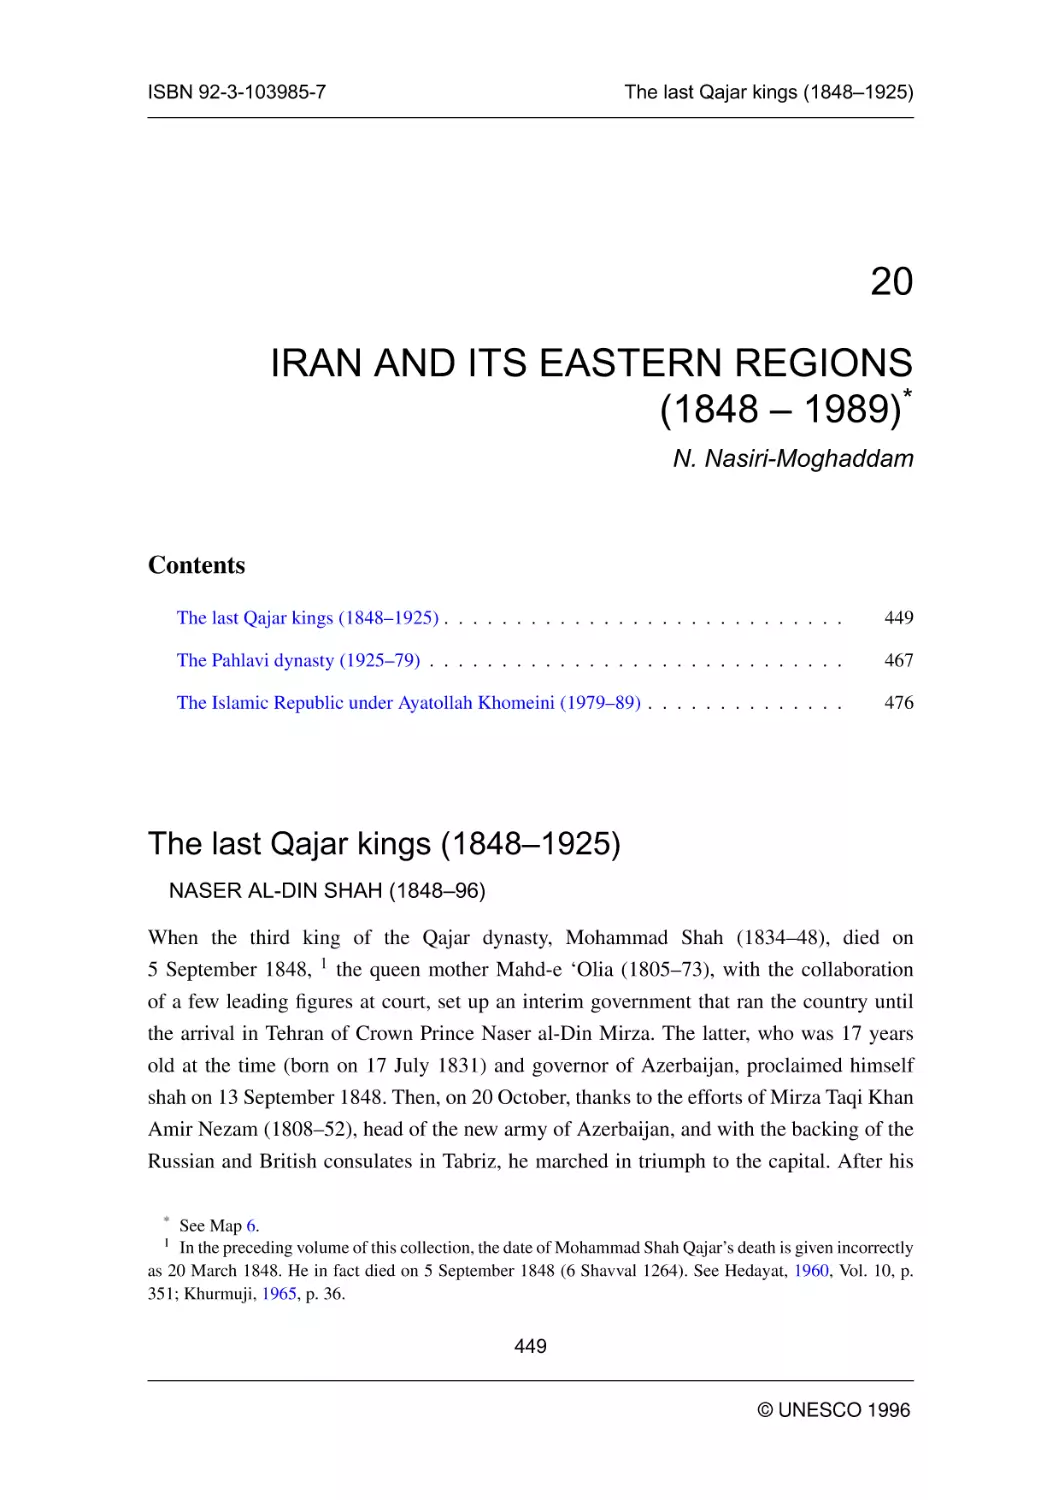 IRAN AND ITS EASTERN REGIONS (1848 -- 1989)